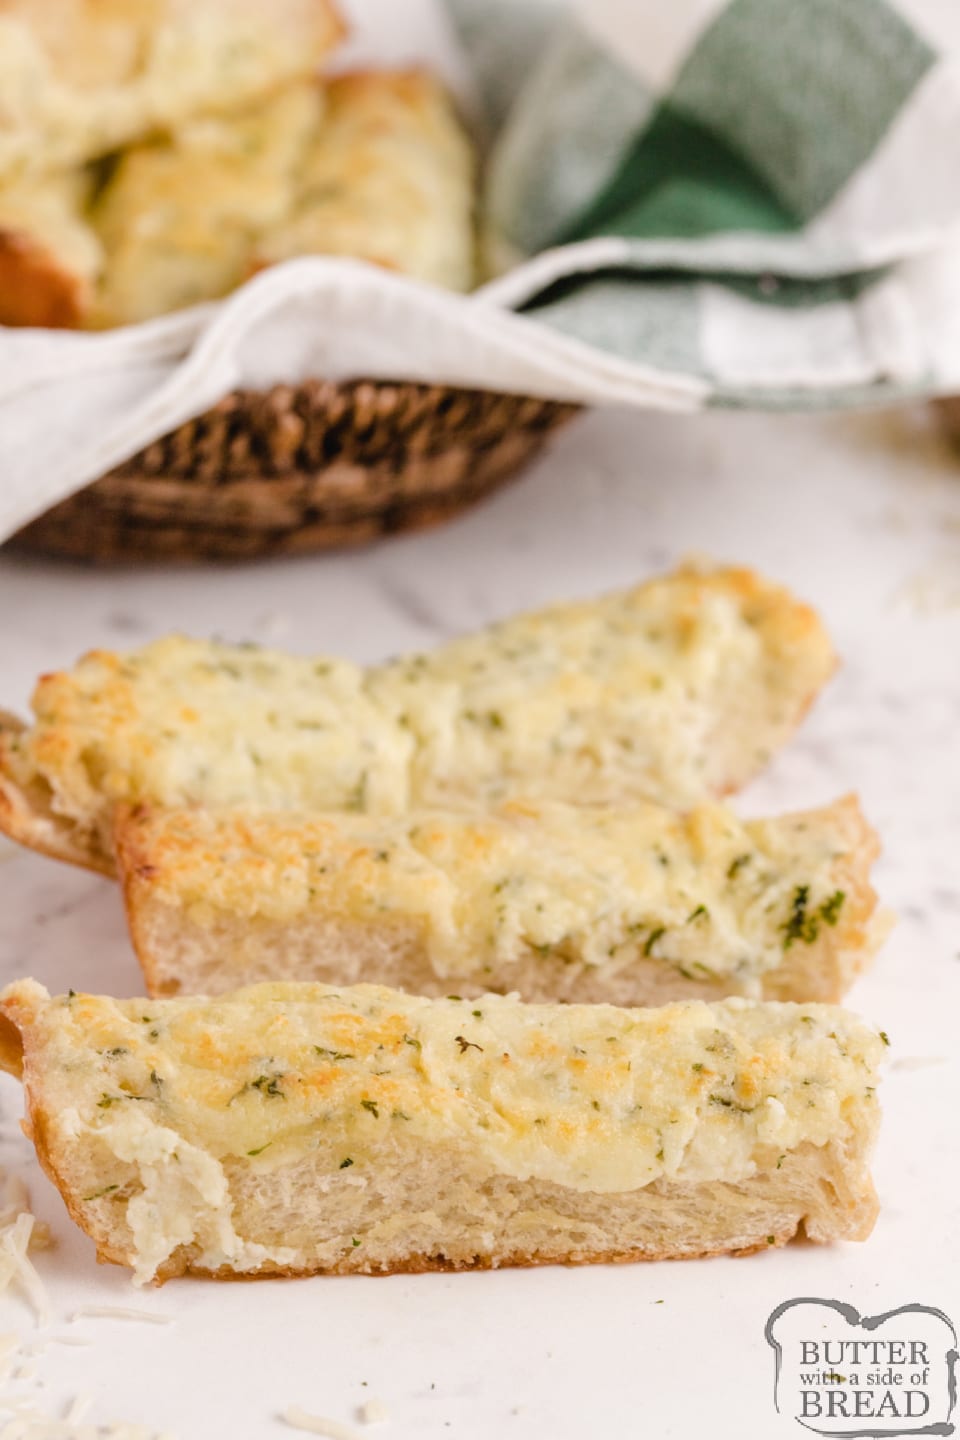 Easy Cheesy Garlic Bread is loaded with butter, cream cheese, garlic, parsley and mozzarella- it's the perfect side dish for every Italian meal! Perfectly seasoned and loaded with cheese, this garlic bread recipe can be made and served in under 10 minutes! 